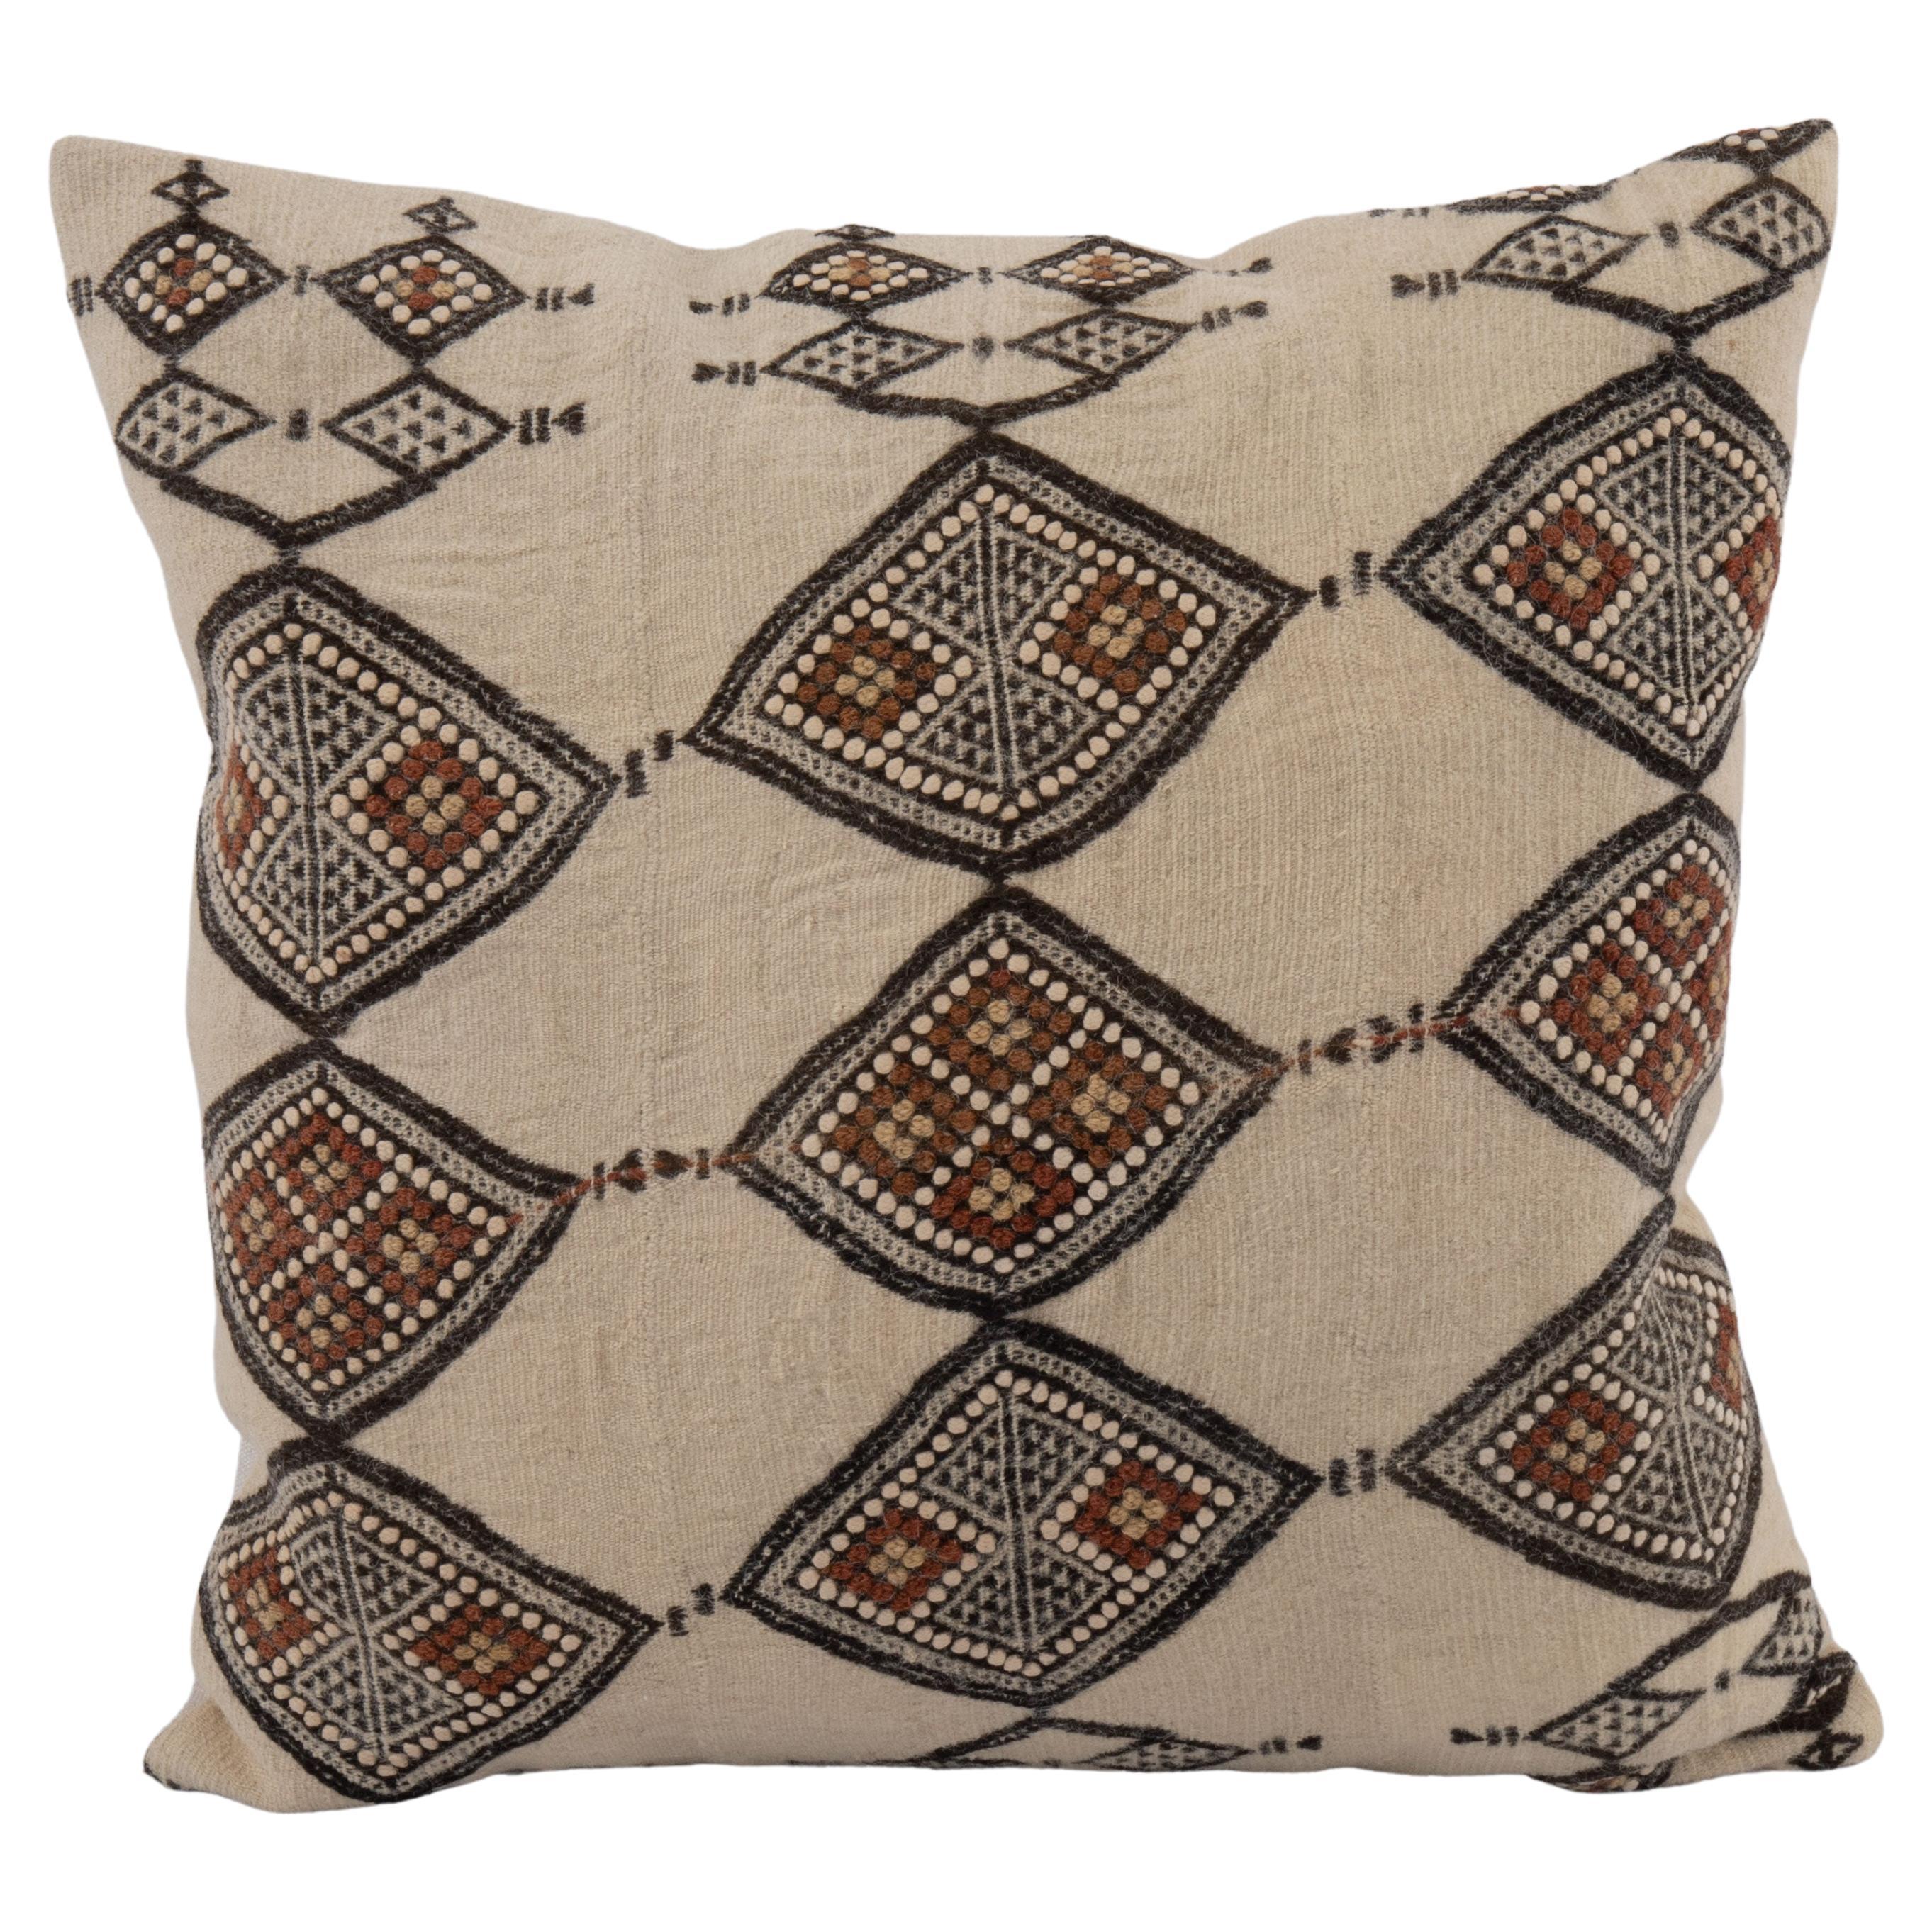 Pillow Cover Made from a Vintage West African Fulani Blanket  